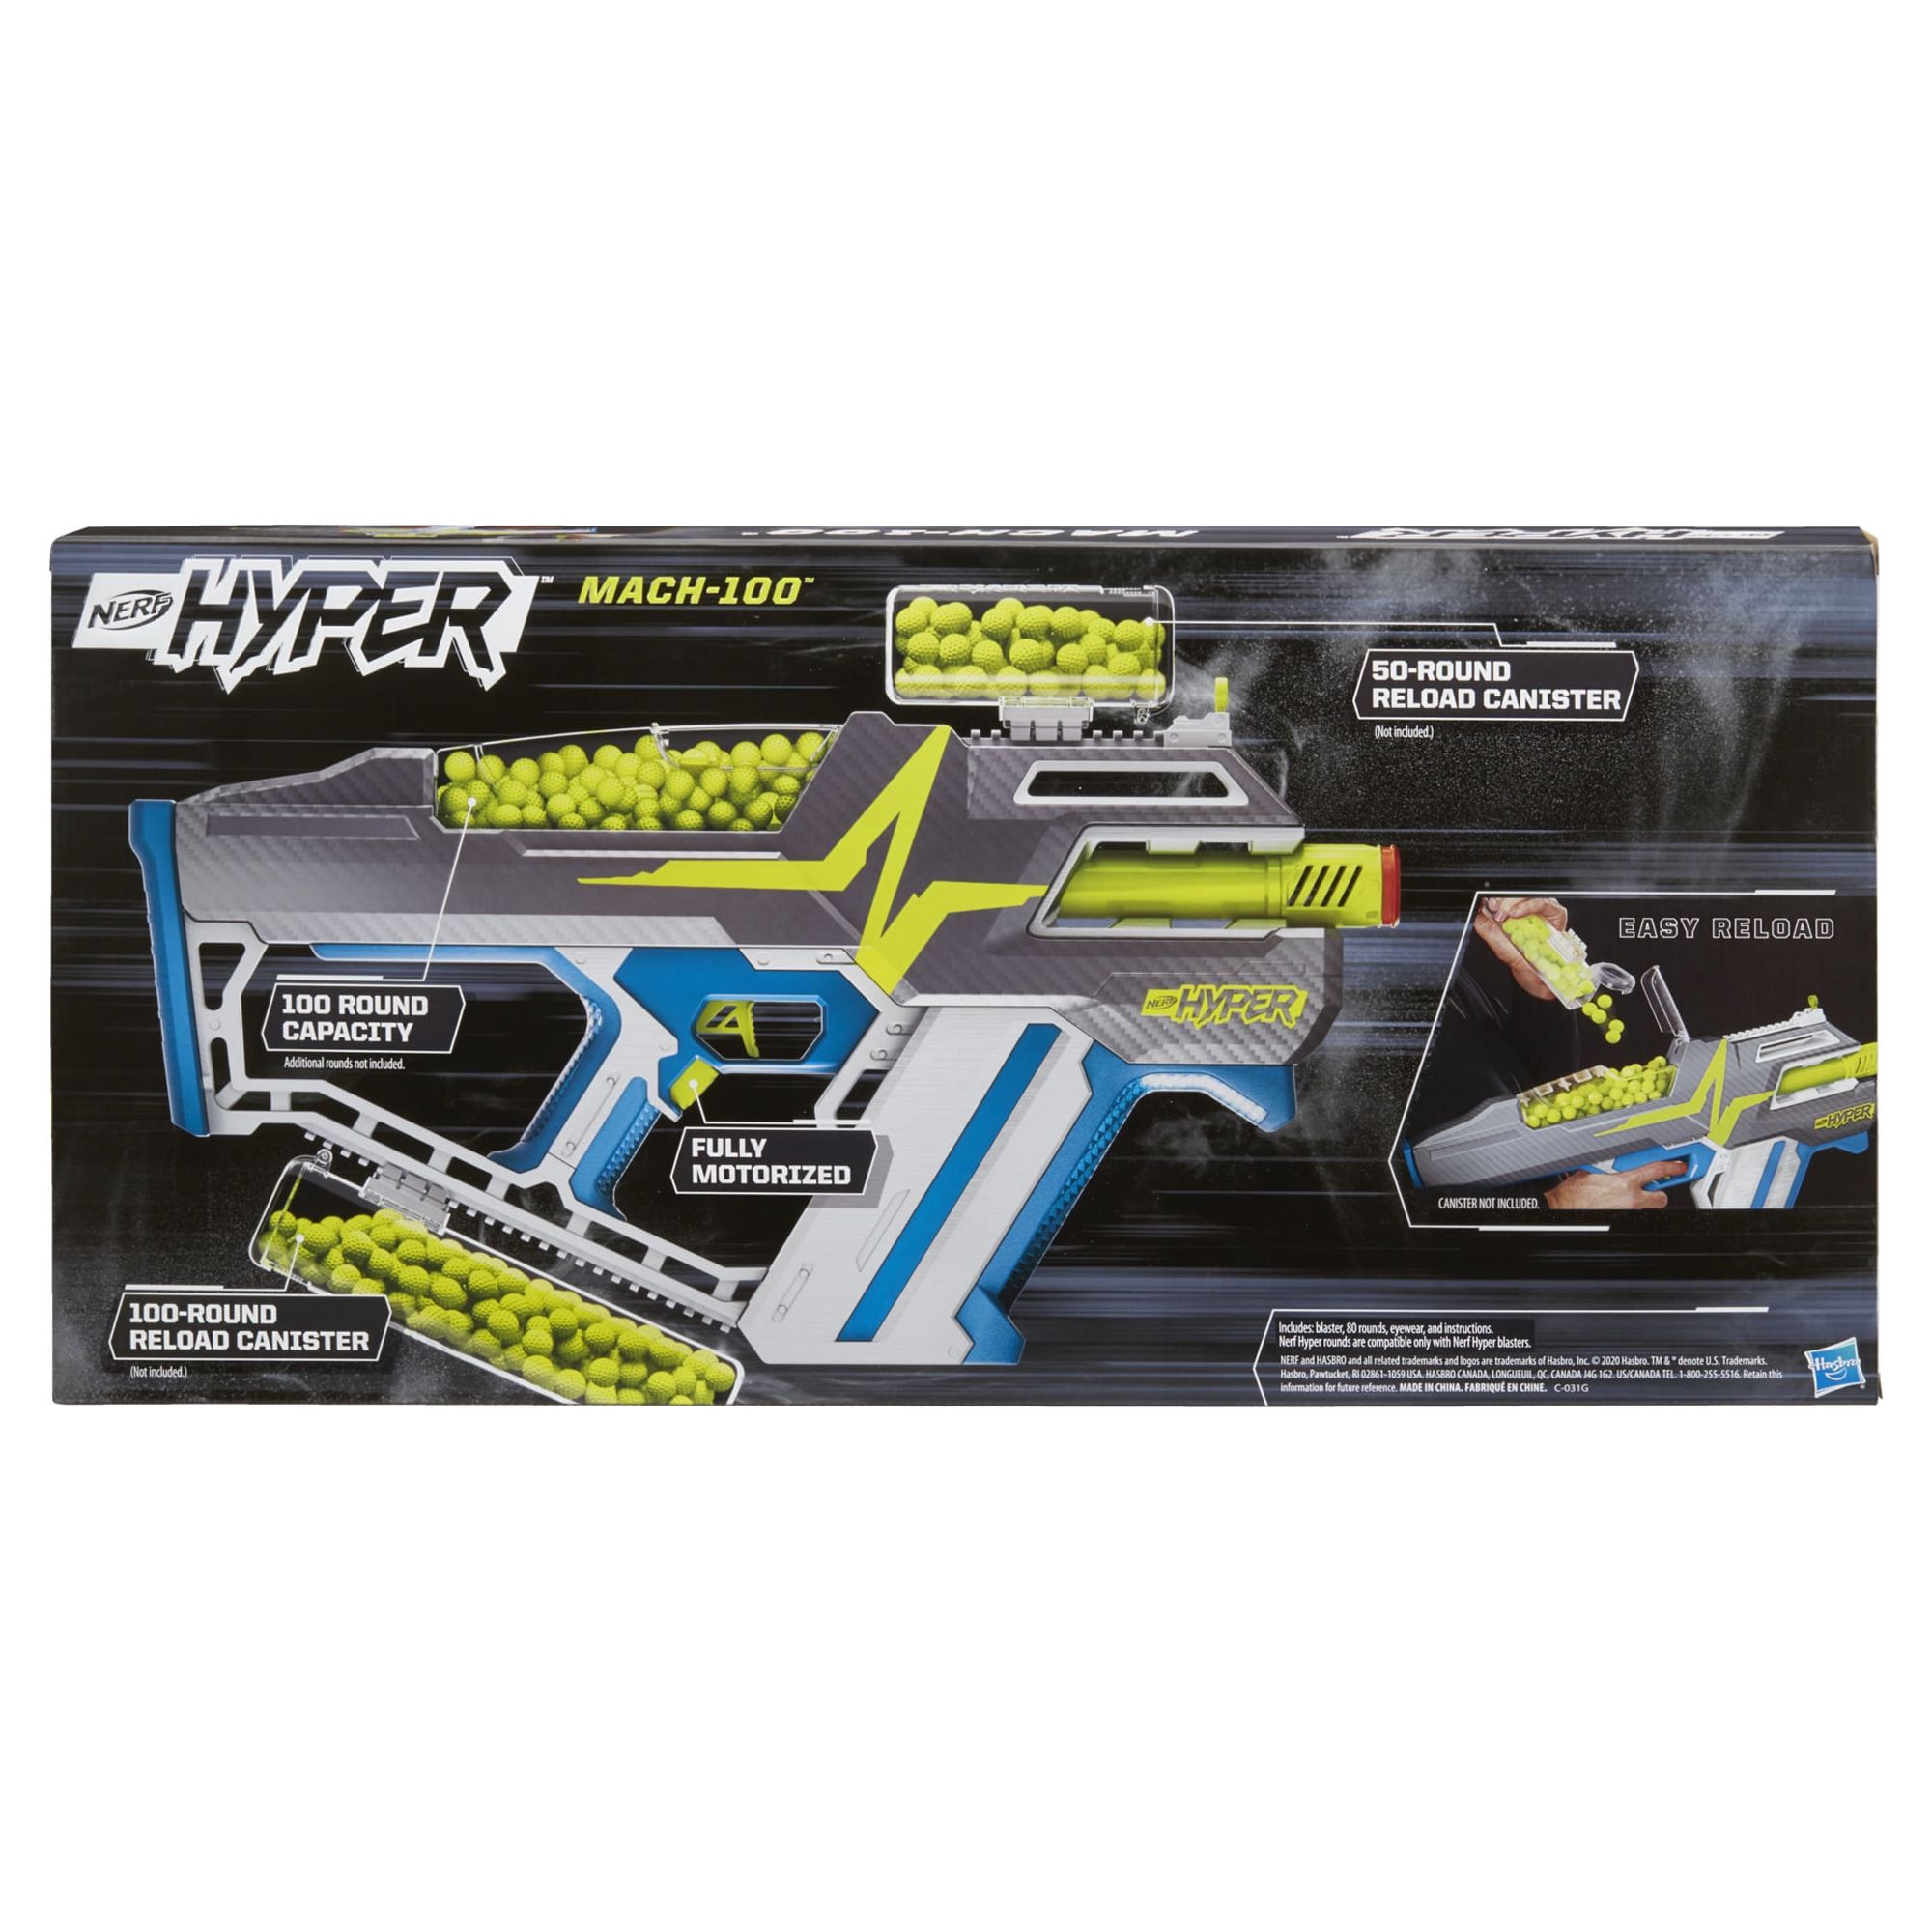 Nerf Hyper Mach-100 Fully Motorized Blaster, 80 Nerf Hyper Rounds Included, Ages 14+ - image 5 of 11